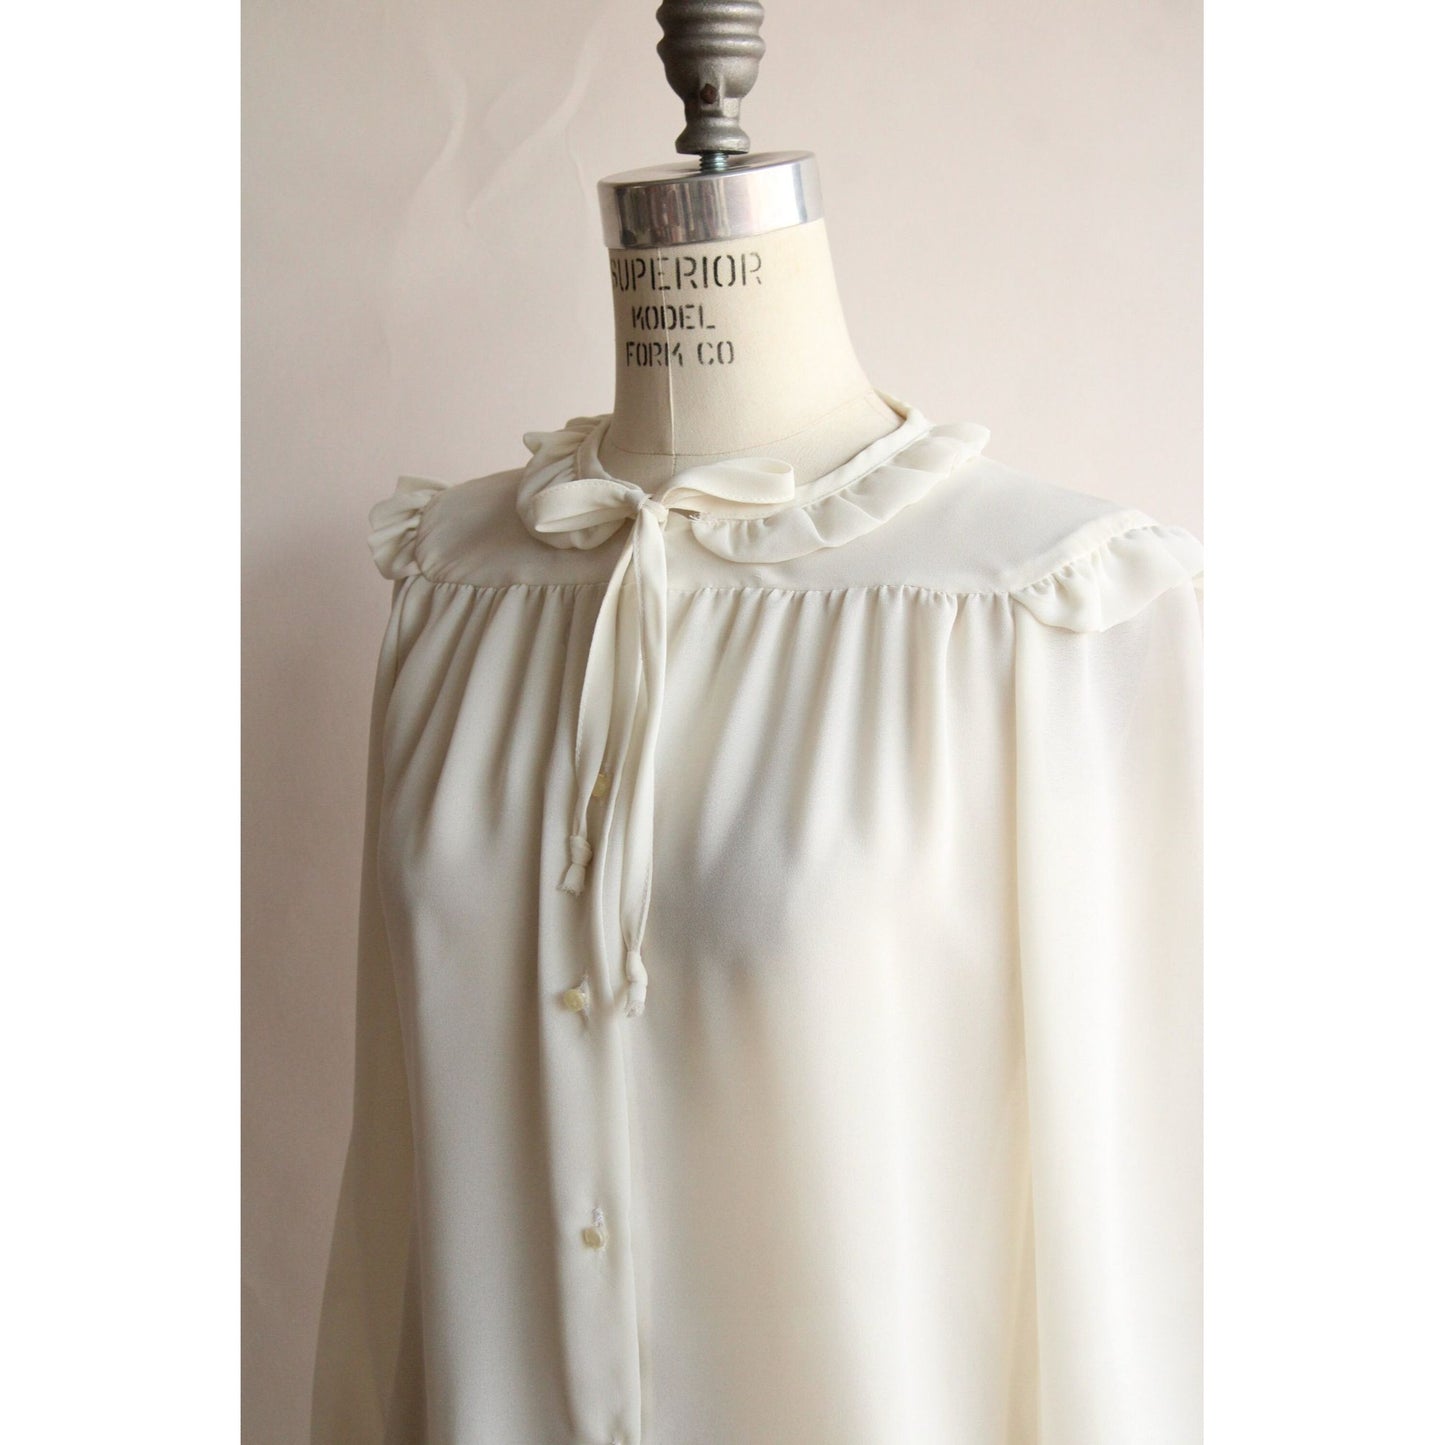 Vintage 1980s Blouse with Kitty Bow and Ruffled Collar